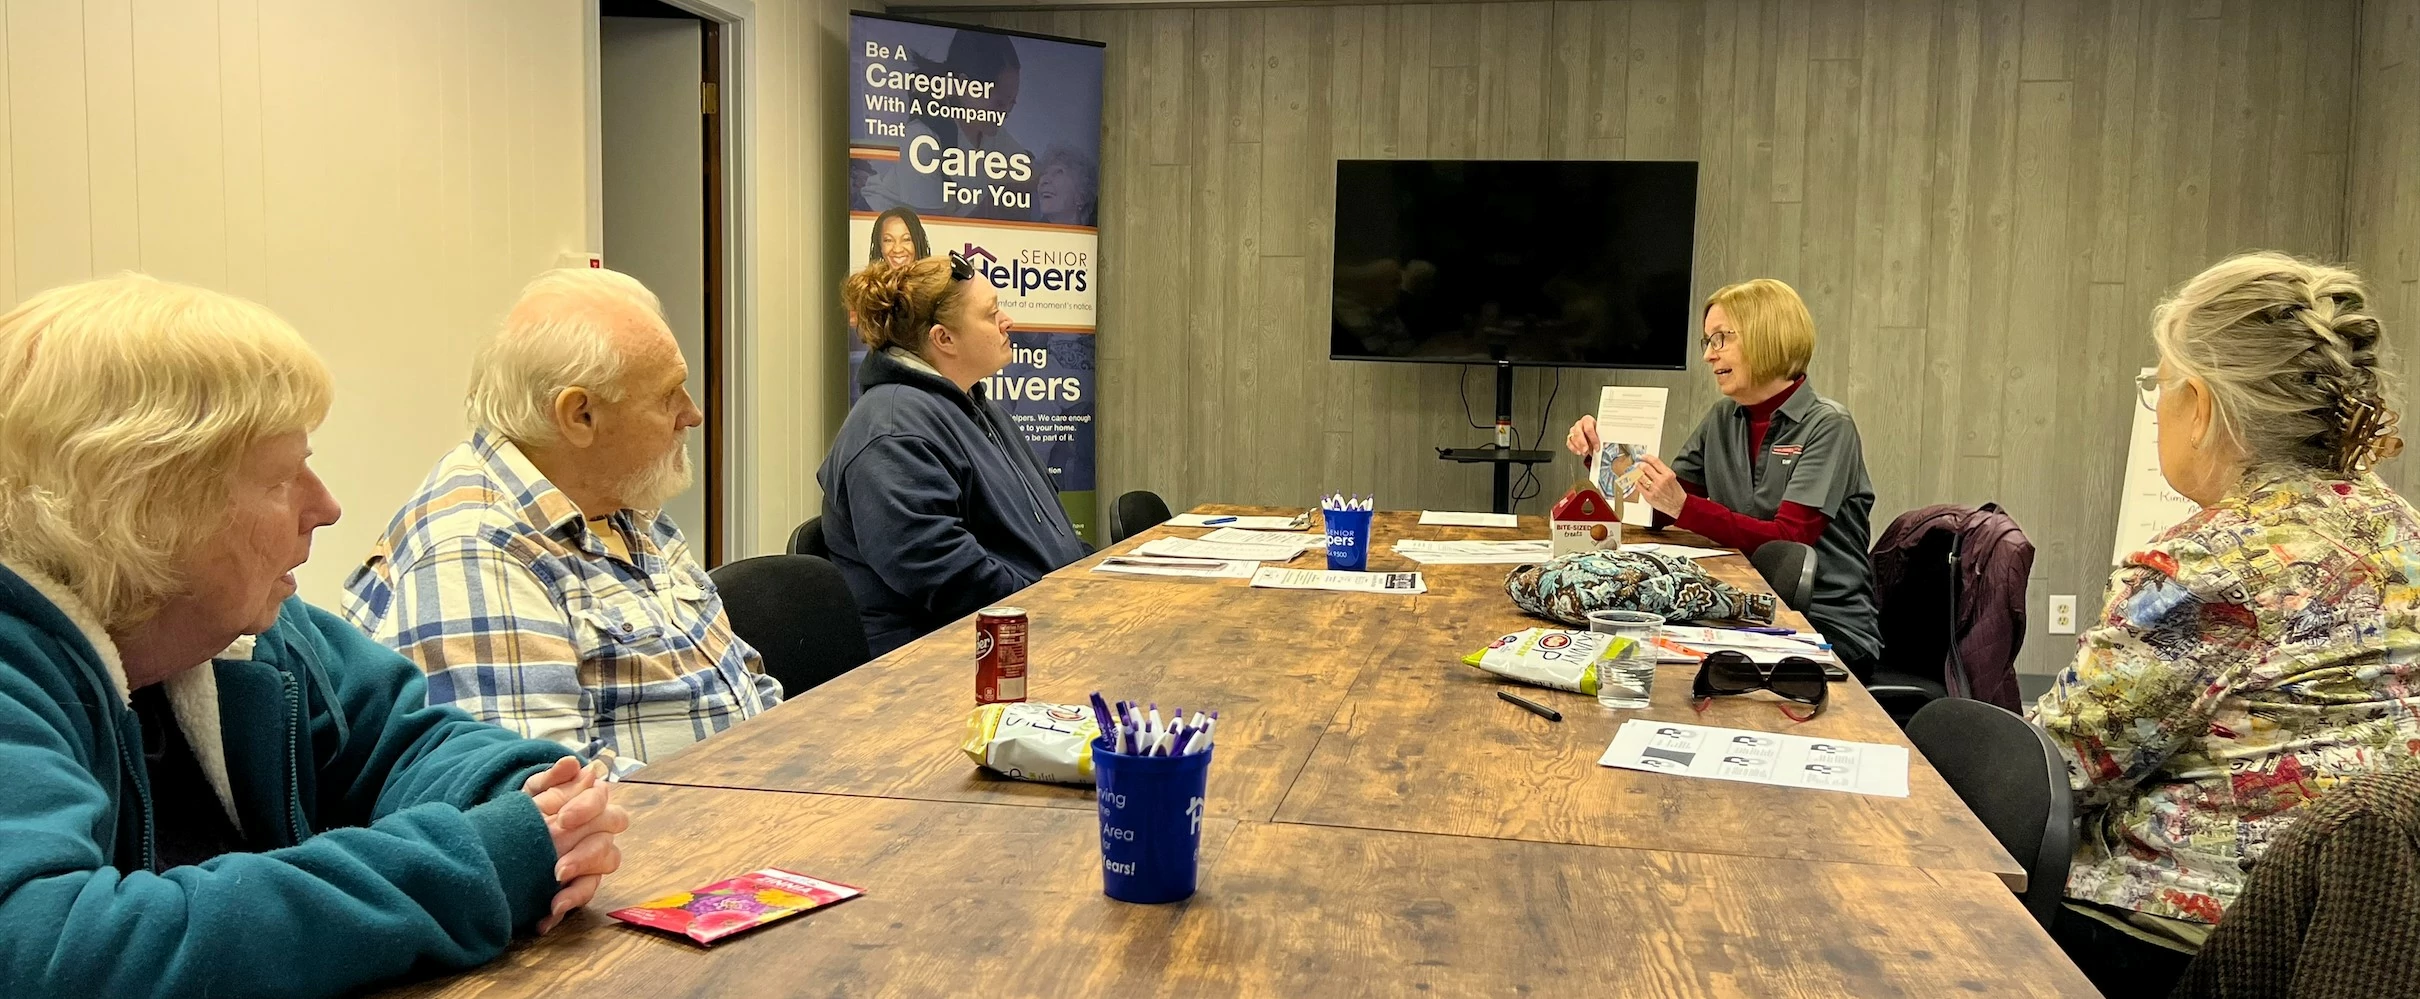 Some of our Caregivers and members of our community were interested in a public talk with the Warren County Fair and how to get seniors more involved.